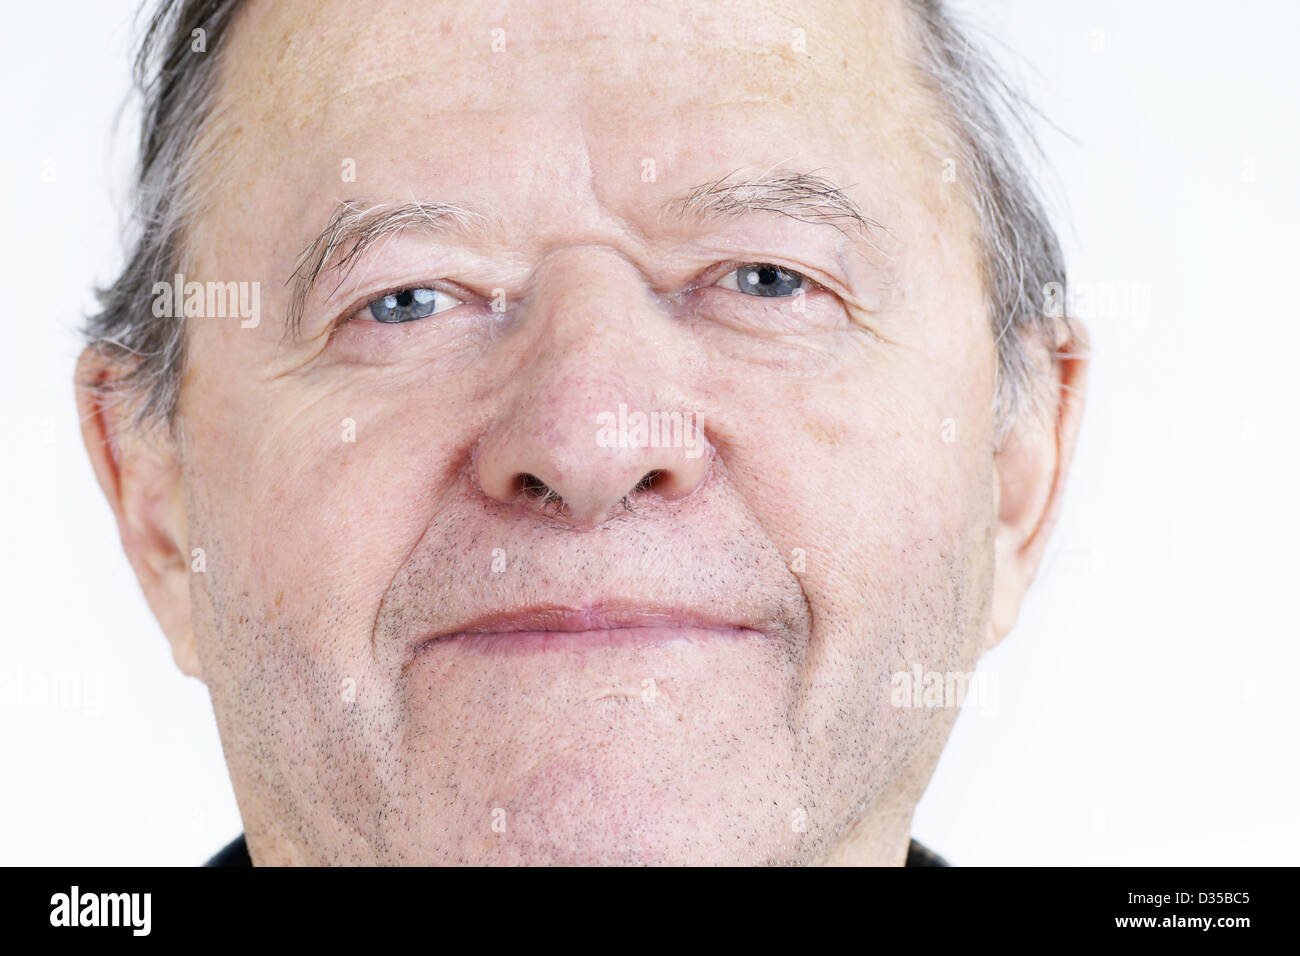 Candid portrait of real person, a smiling senior citizen or old man, no retouching great details. Stock Photo